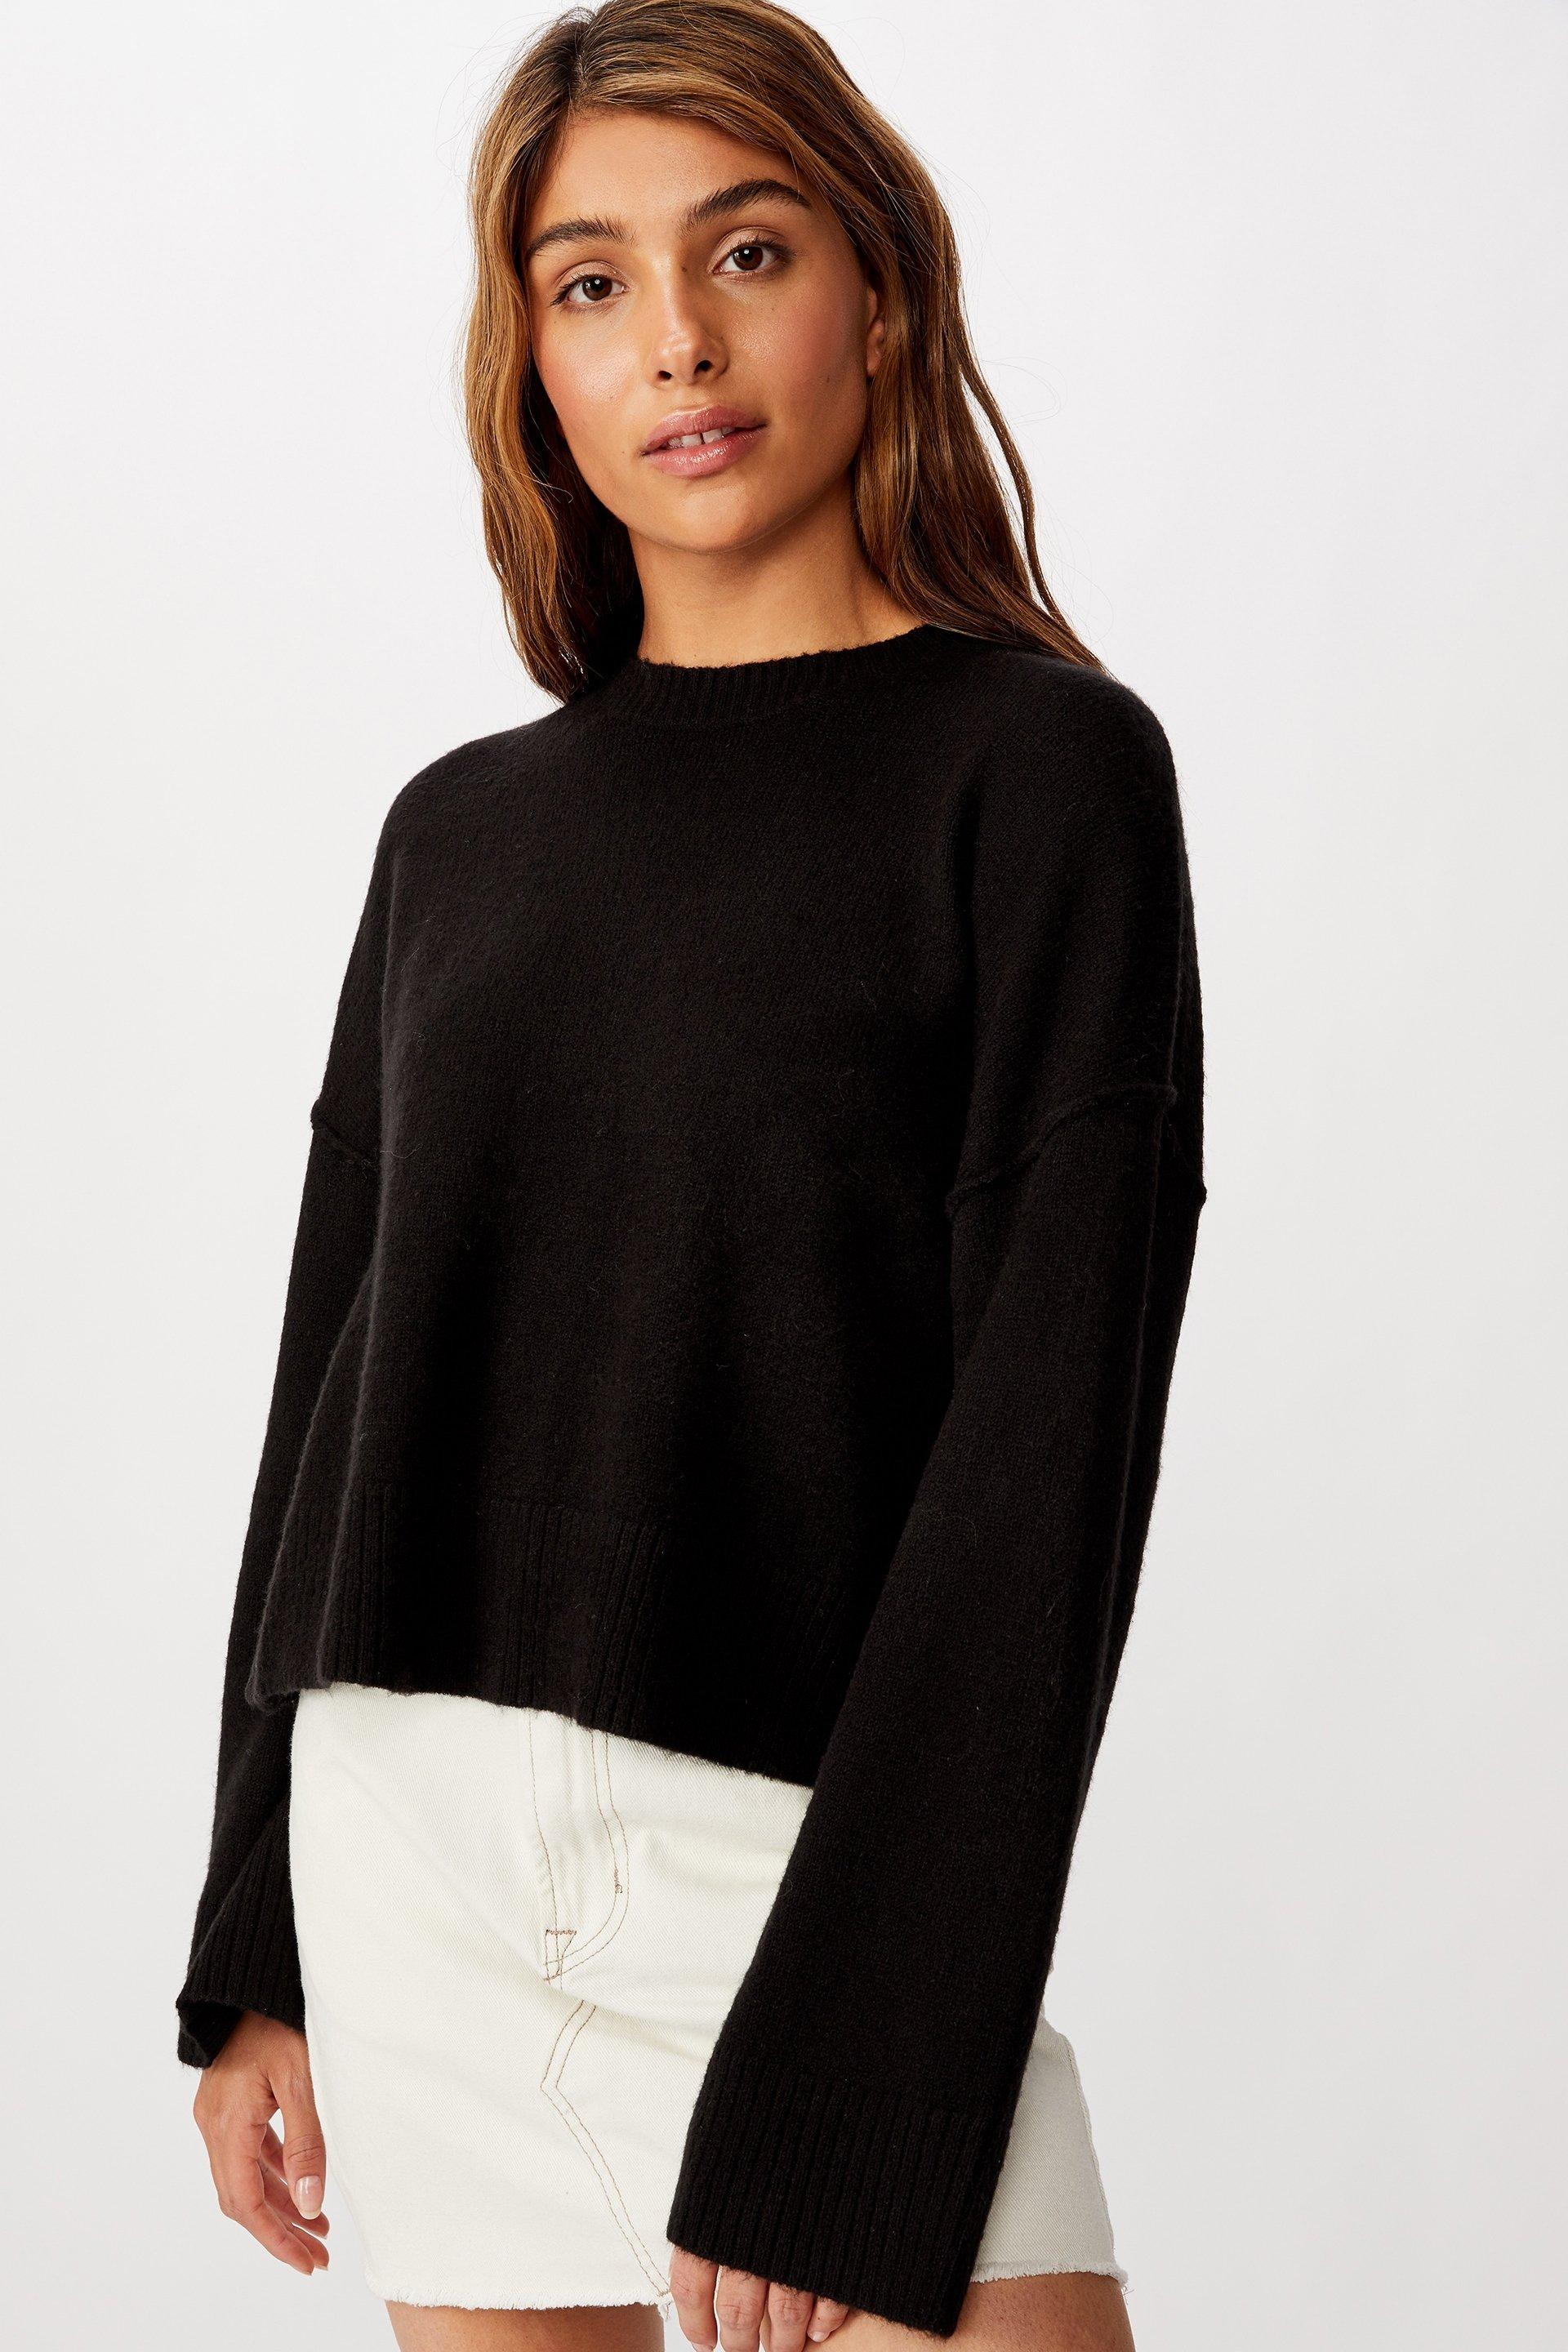 Side button pullover - black Cotton On Knitwear | Superbalist.com